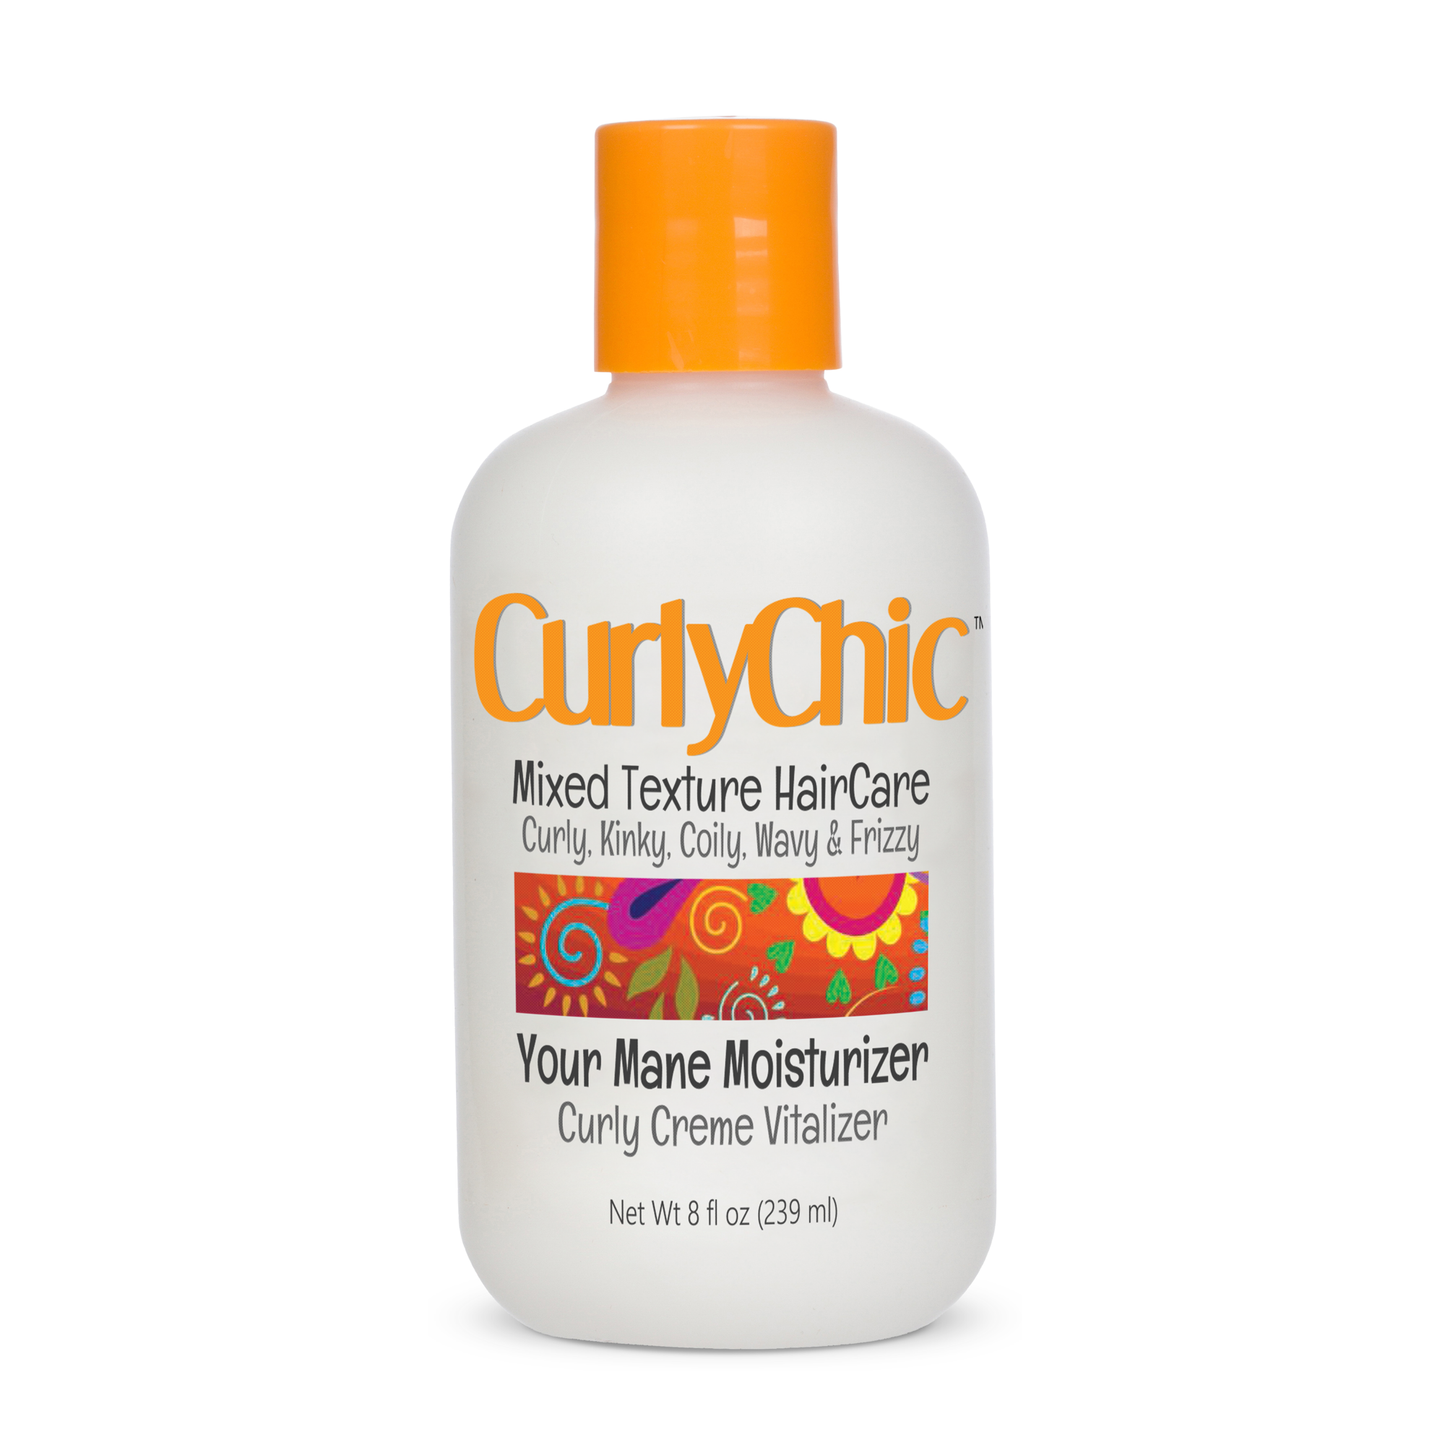 Curly Chic Mixed Texture HairCare Your Mane Moisturiser - 8 Oz